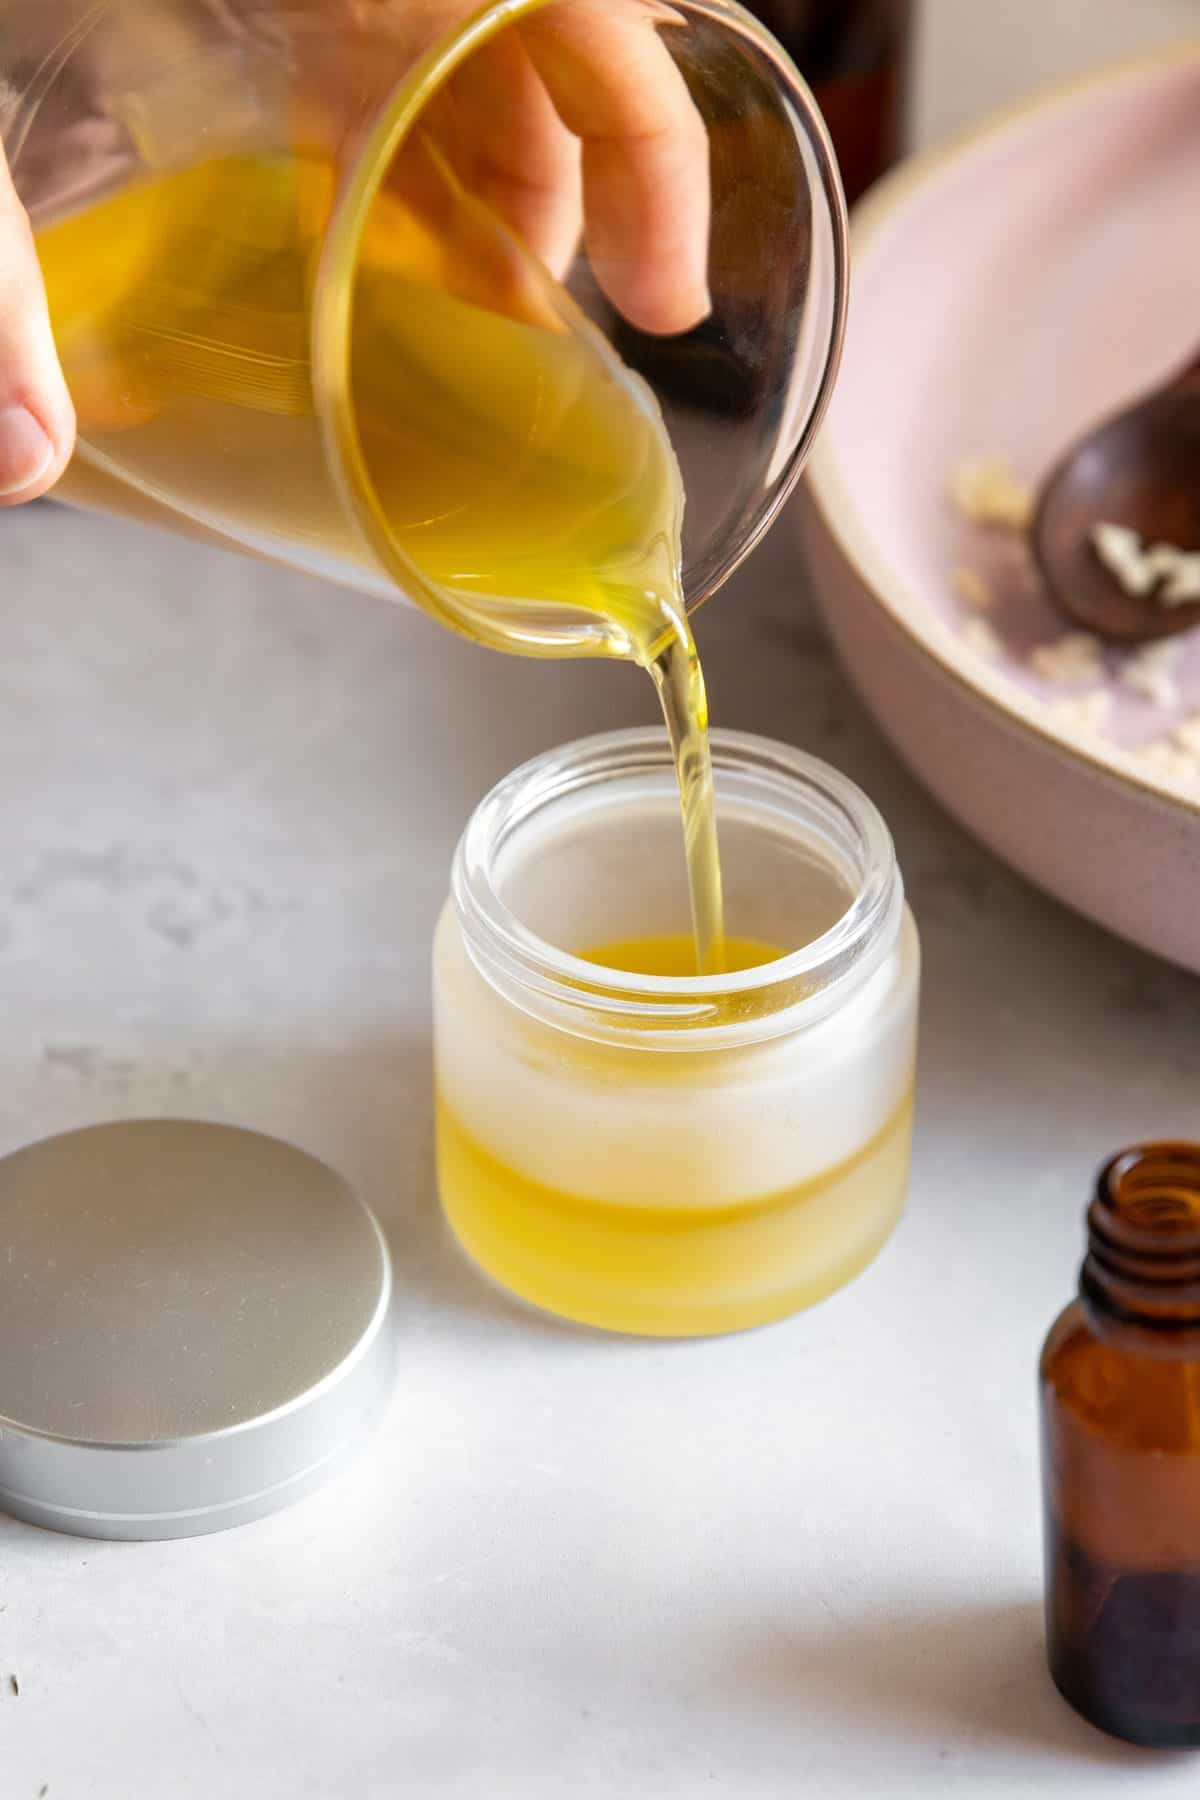 Pour Cuticle Balm into Container